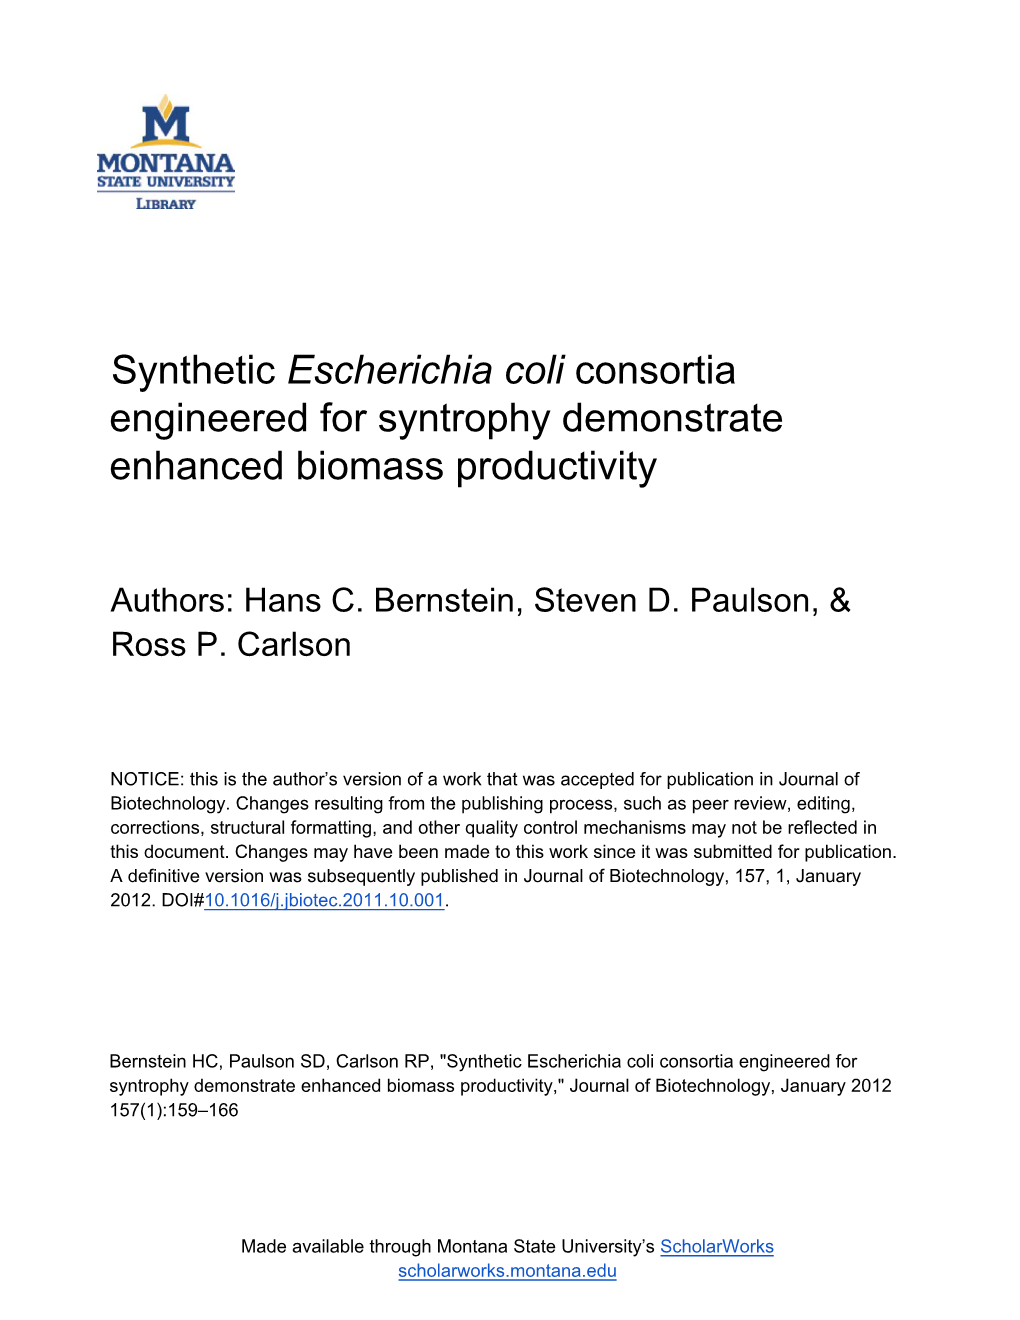 Synthetic Escherichia Coli Consortia Engineered for Syntrophy Demonstrate Enhanced Biomass Productivity